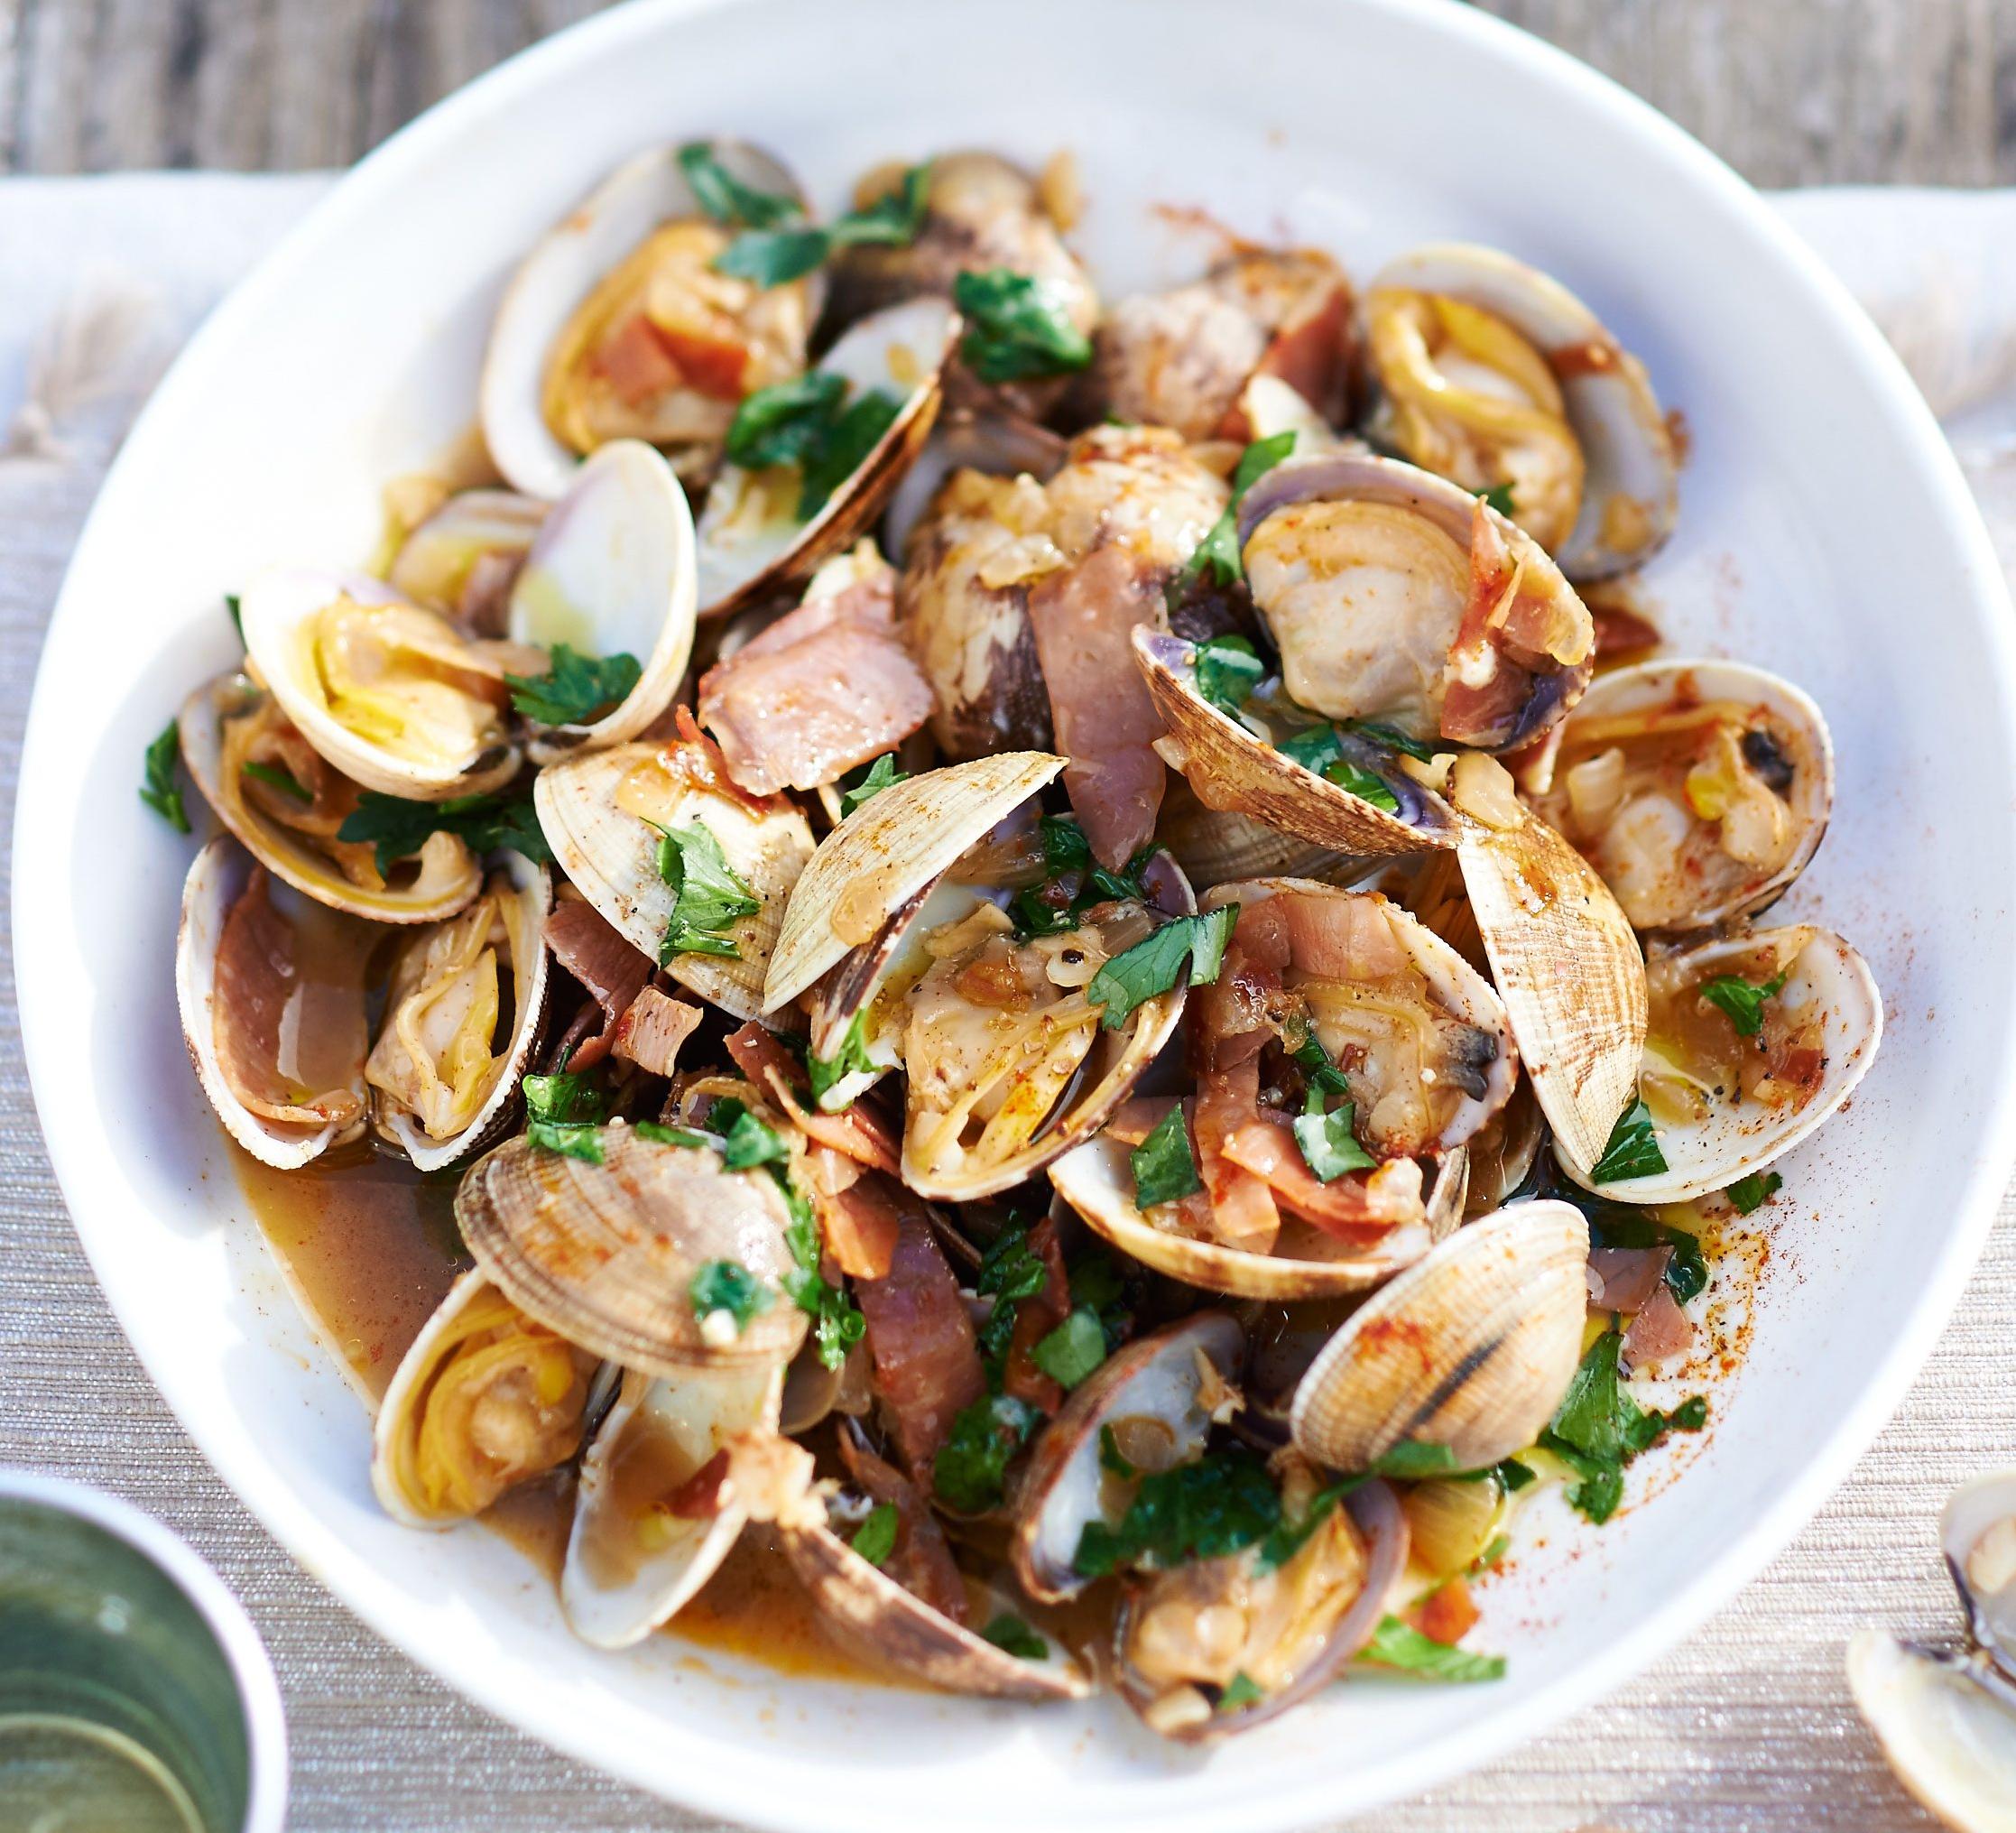  A perfect match for a crisp white wine, this dish is a seafood lover's dream.